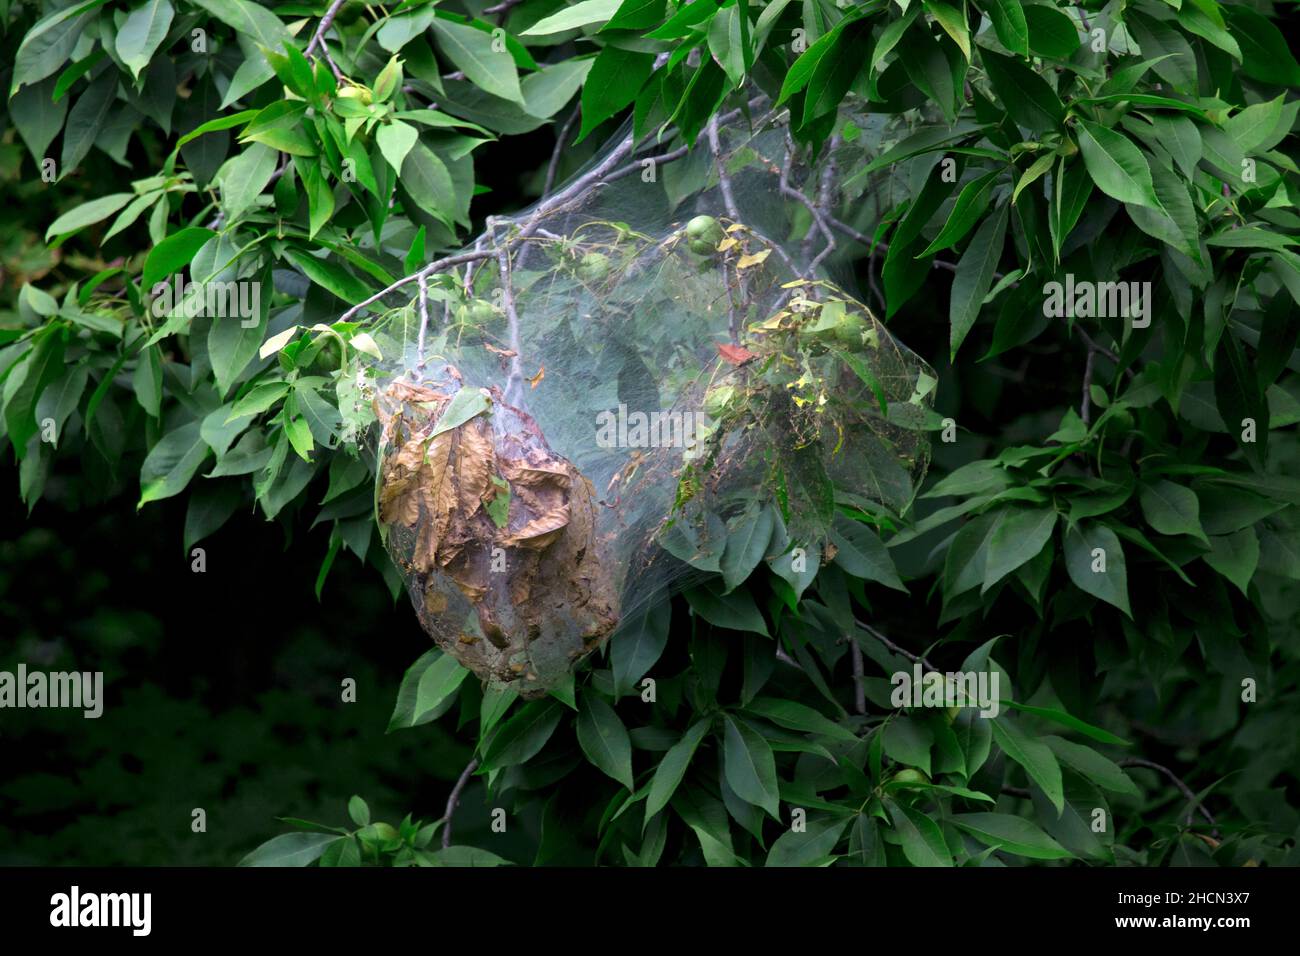 A Fall Webworm nest on shagbark hickory. Although unslightly the insect does little harm to the tree due to it nesting at the end of the growing seaso Stock Photo